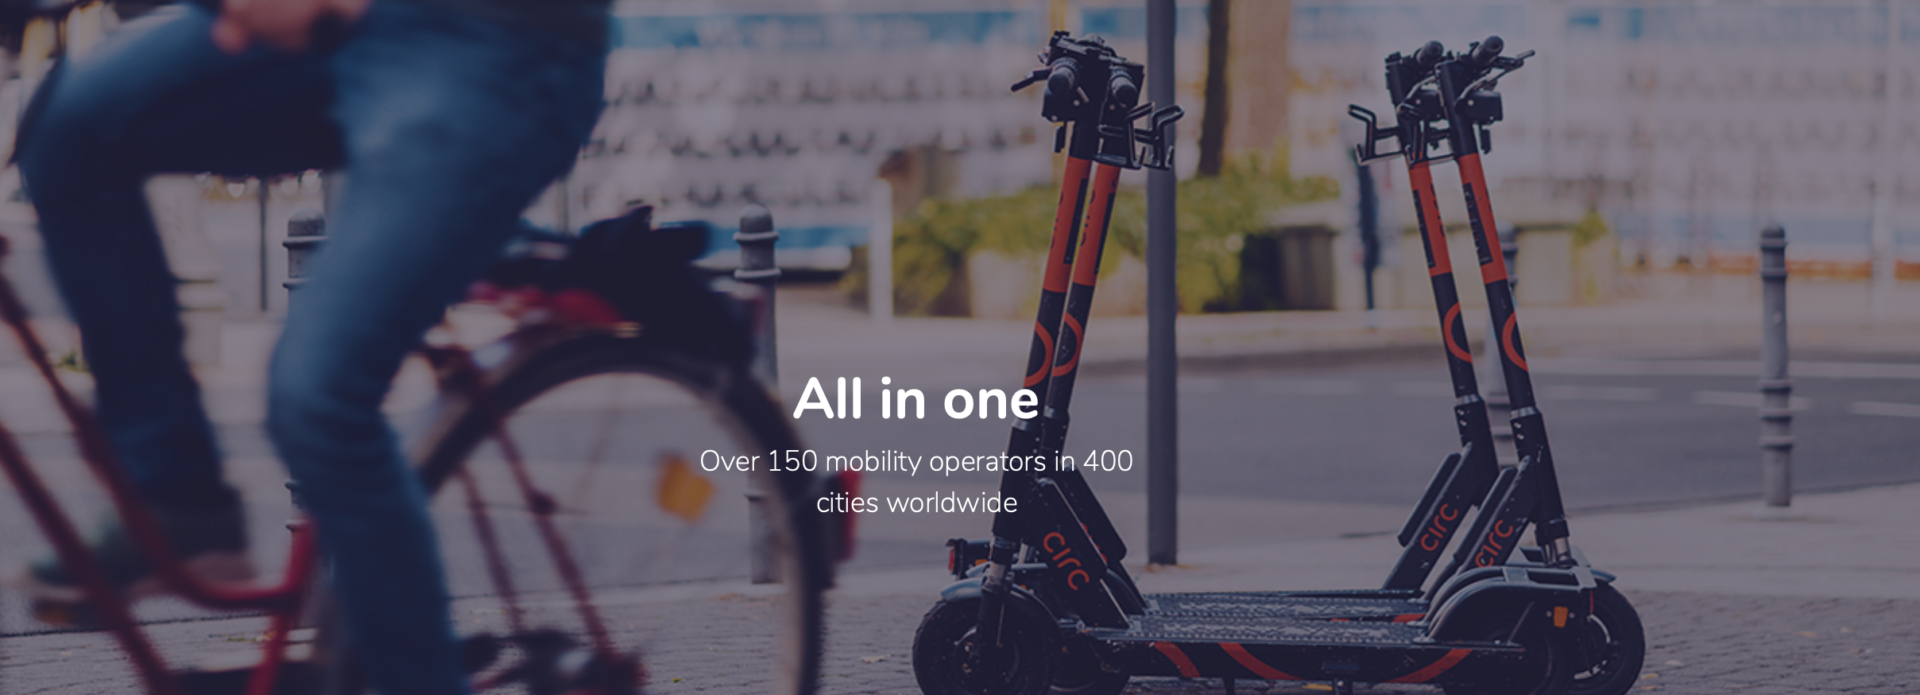 cogo "all in one" cover image with scooters and bike